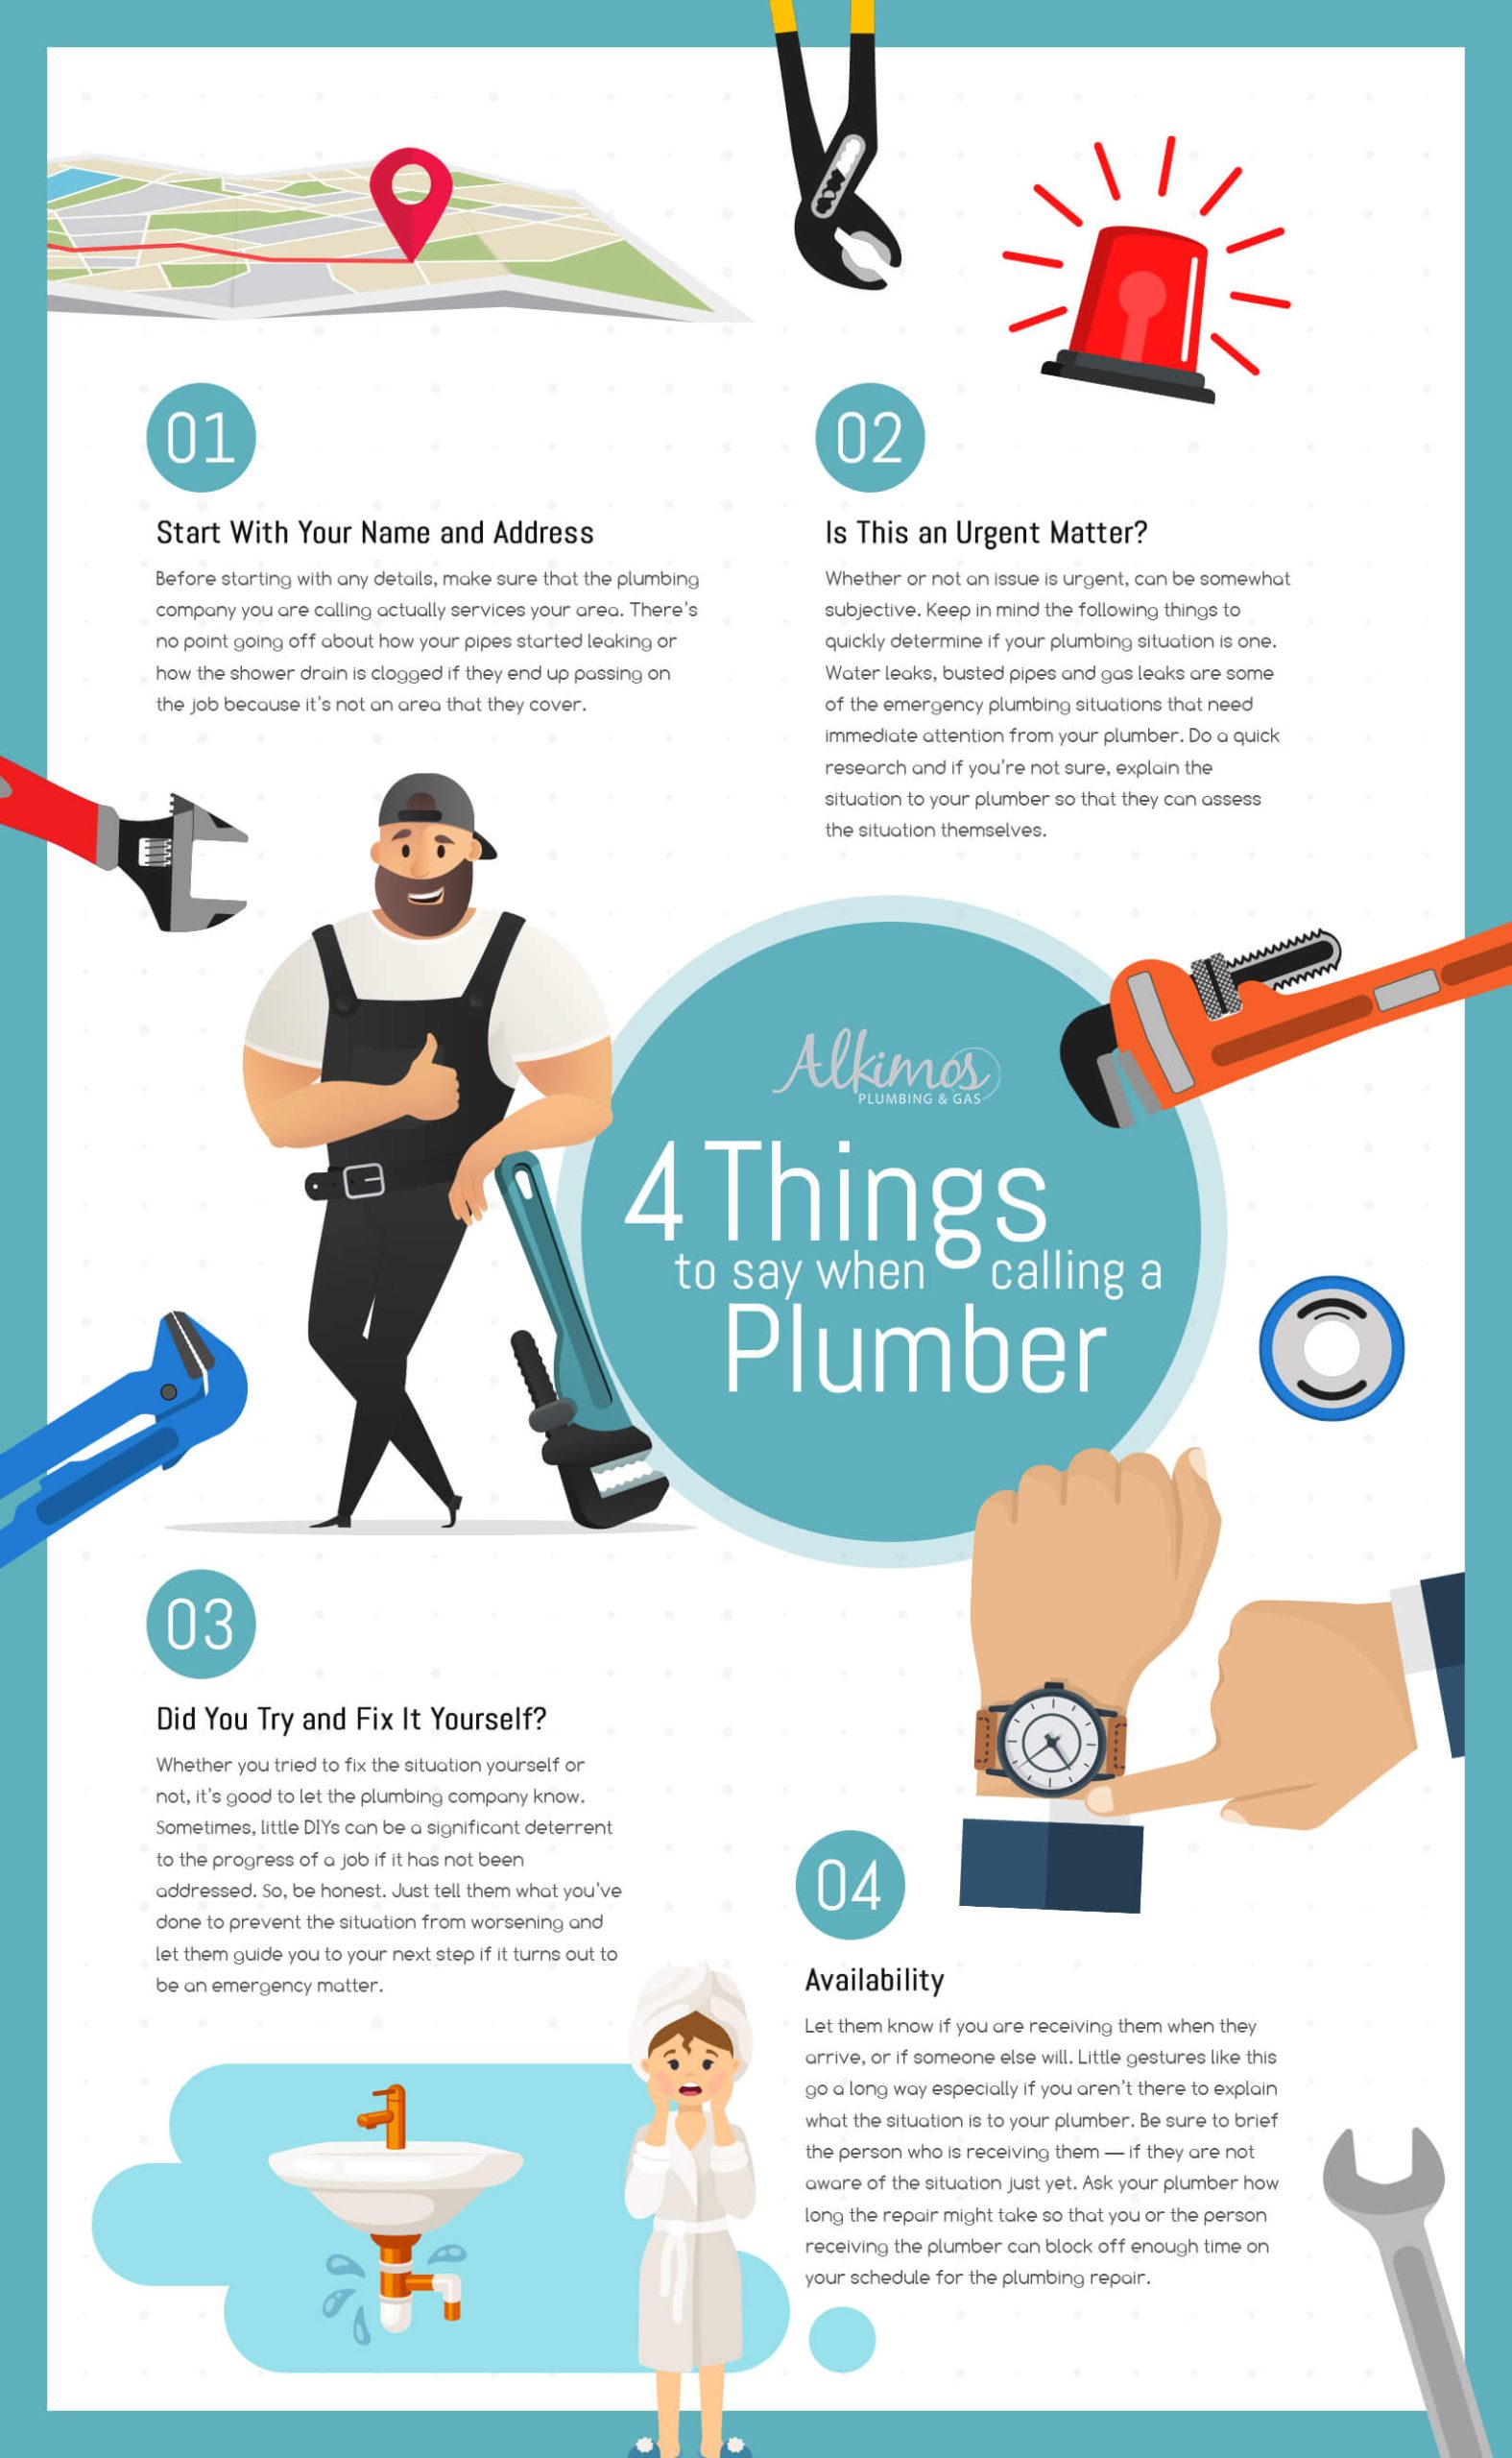 4 Things to Say When Calling Plumber